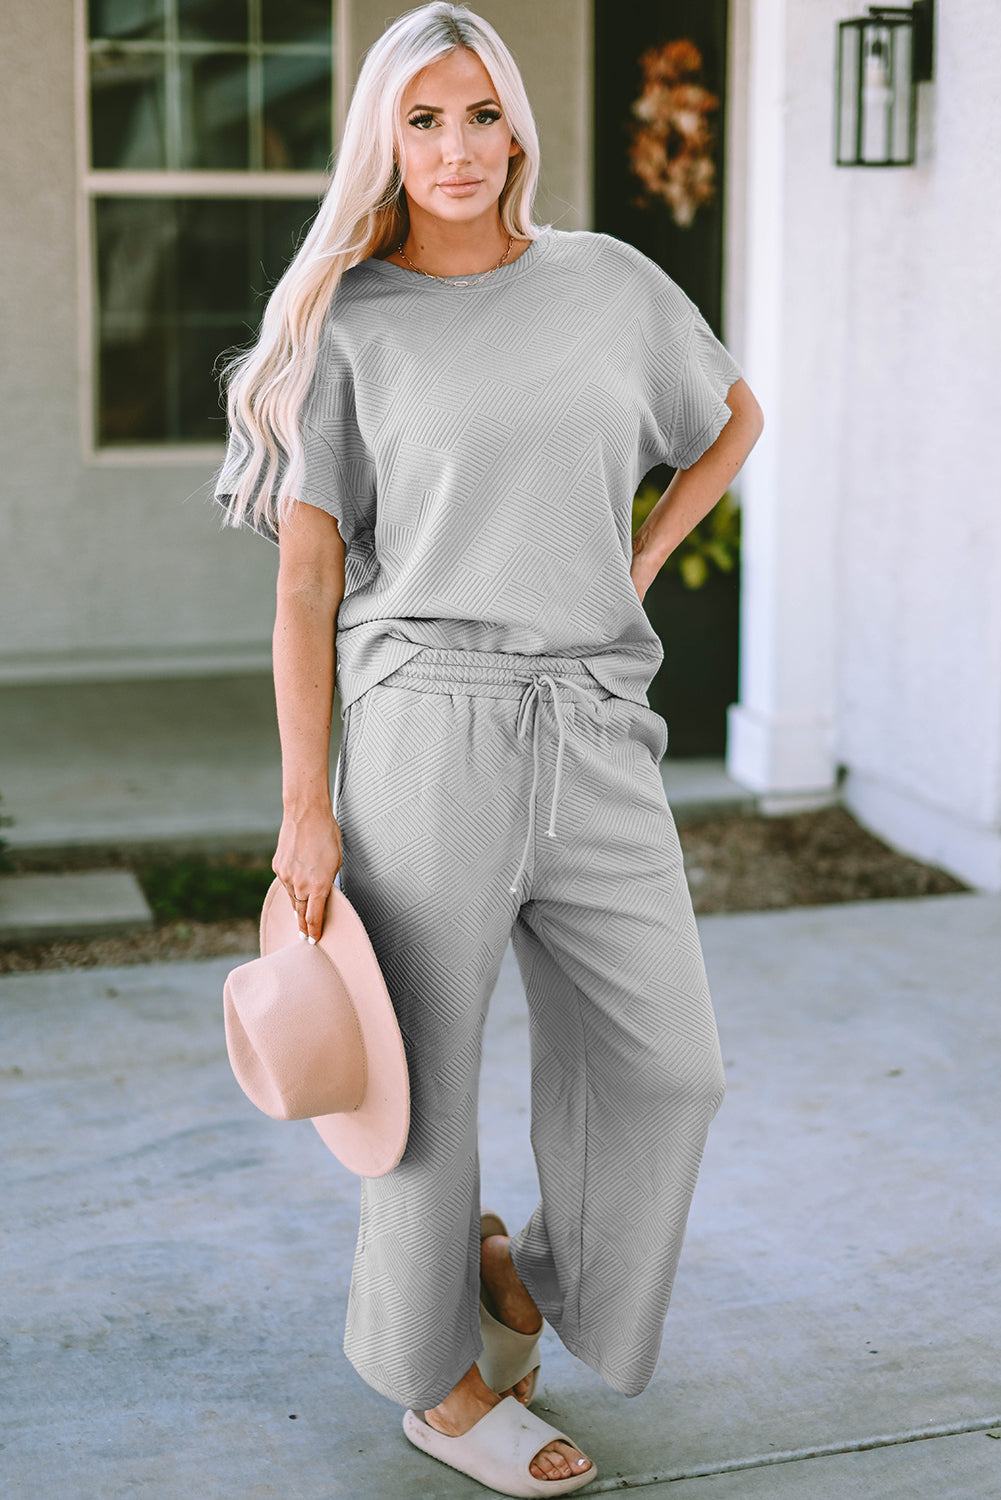 Gray Ultra Loose Textured 2pcs Slouchy Outfit